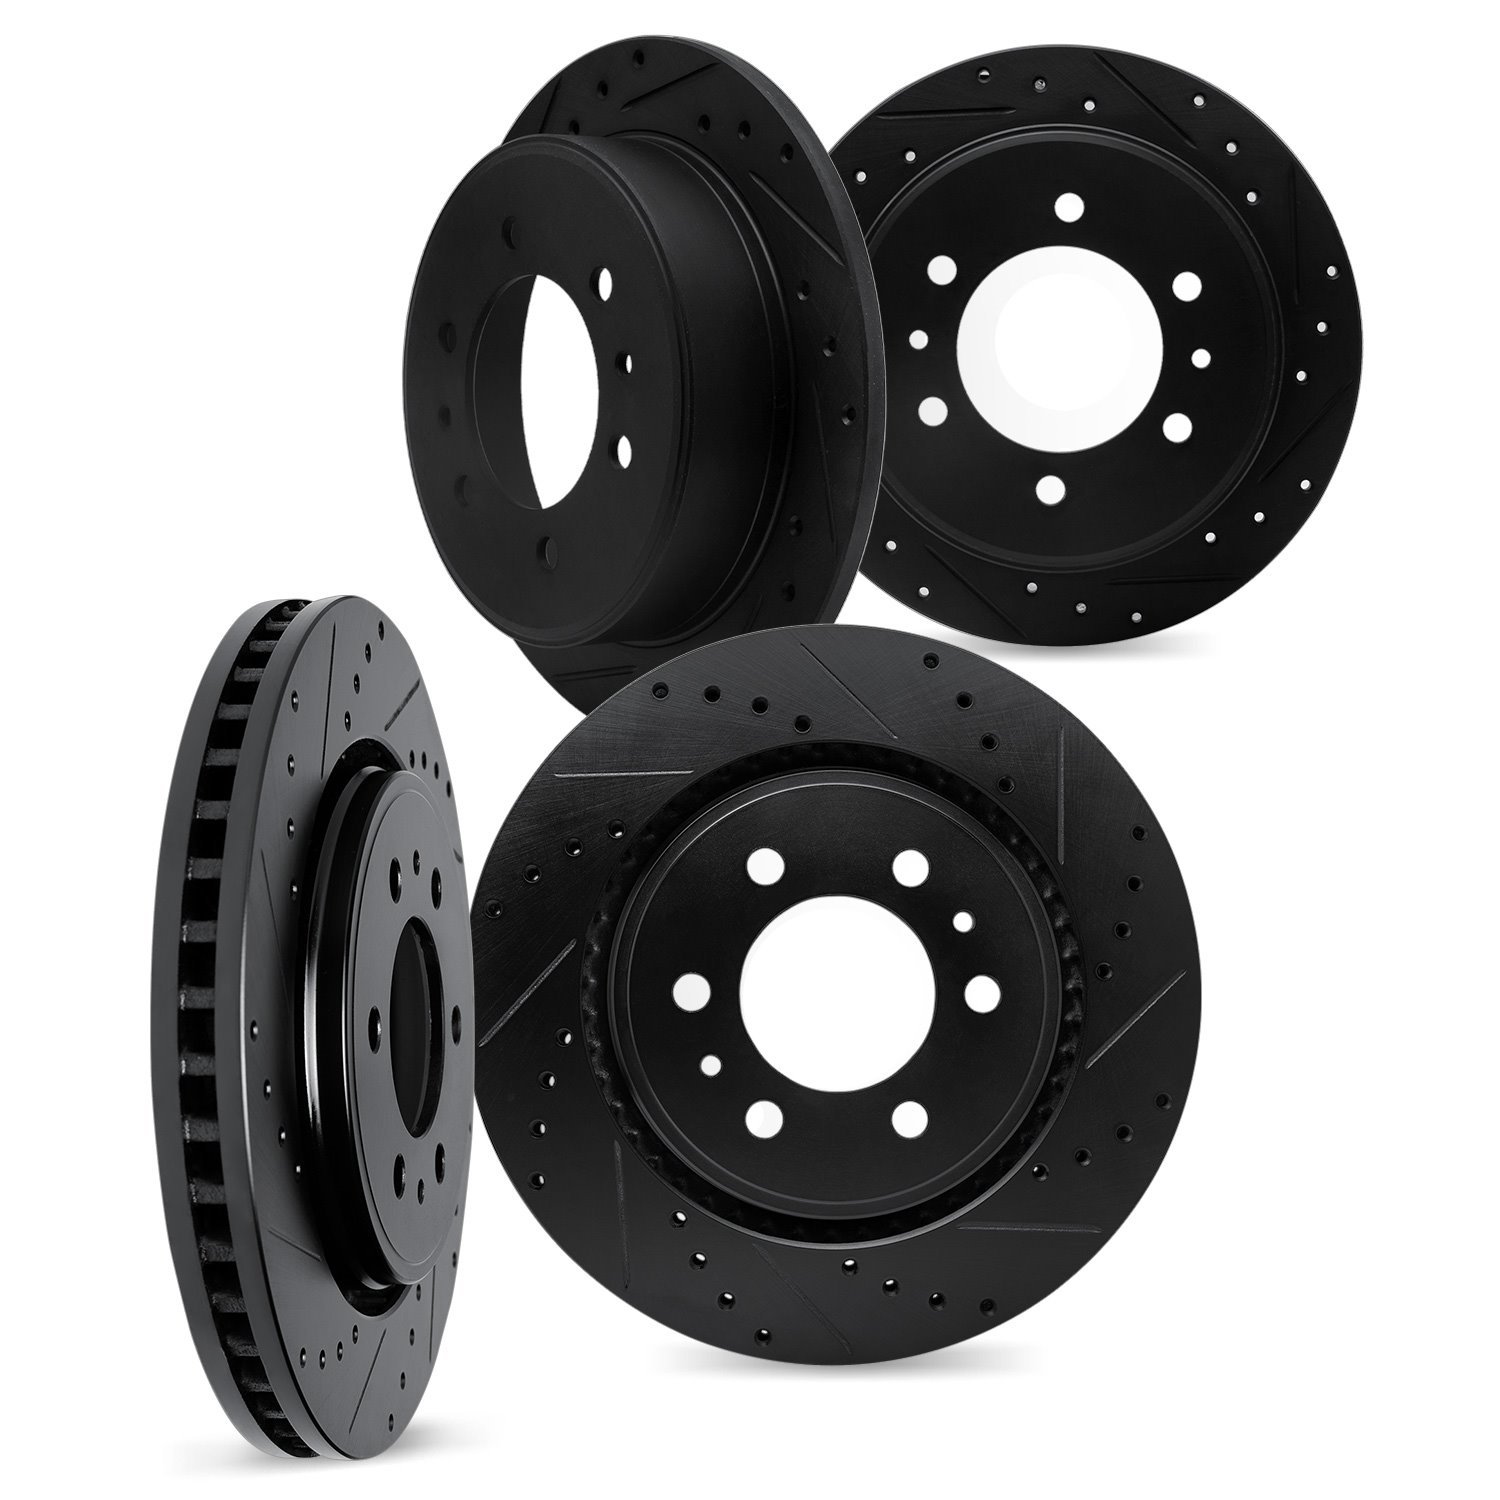 8004-54337 Drilled/Slotted Brake Rotors [Black], Fits Select Ford/Lincoln/Mercury/Mazda, Position: Front and Rear